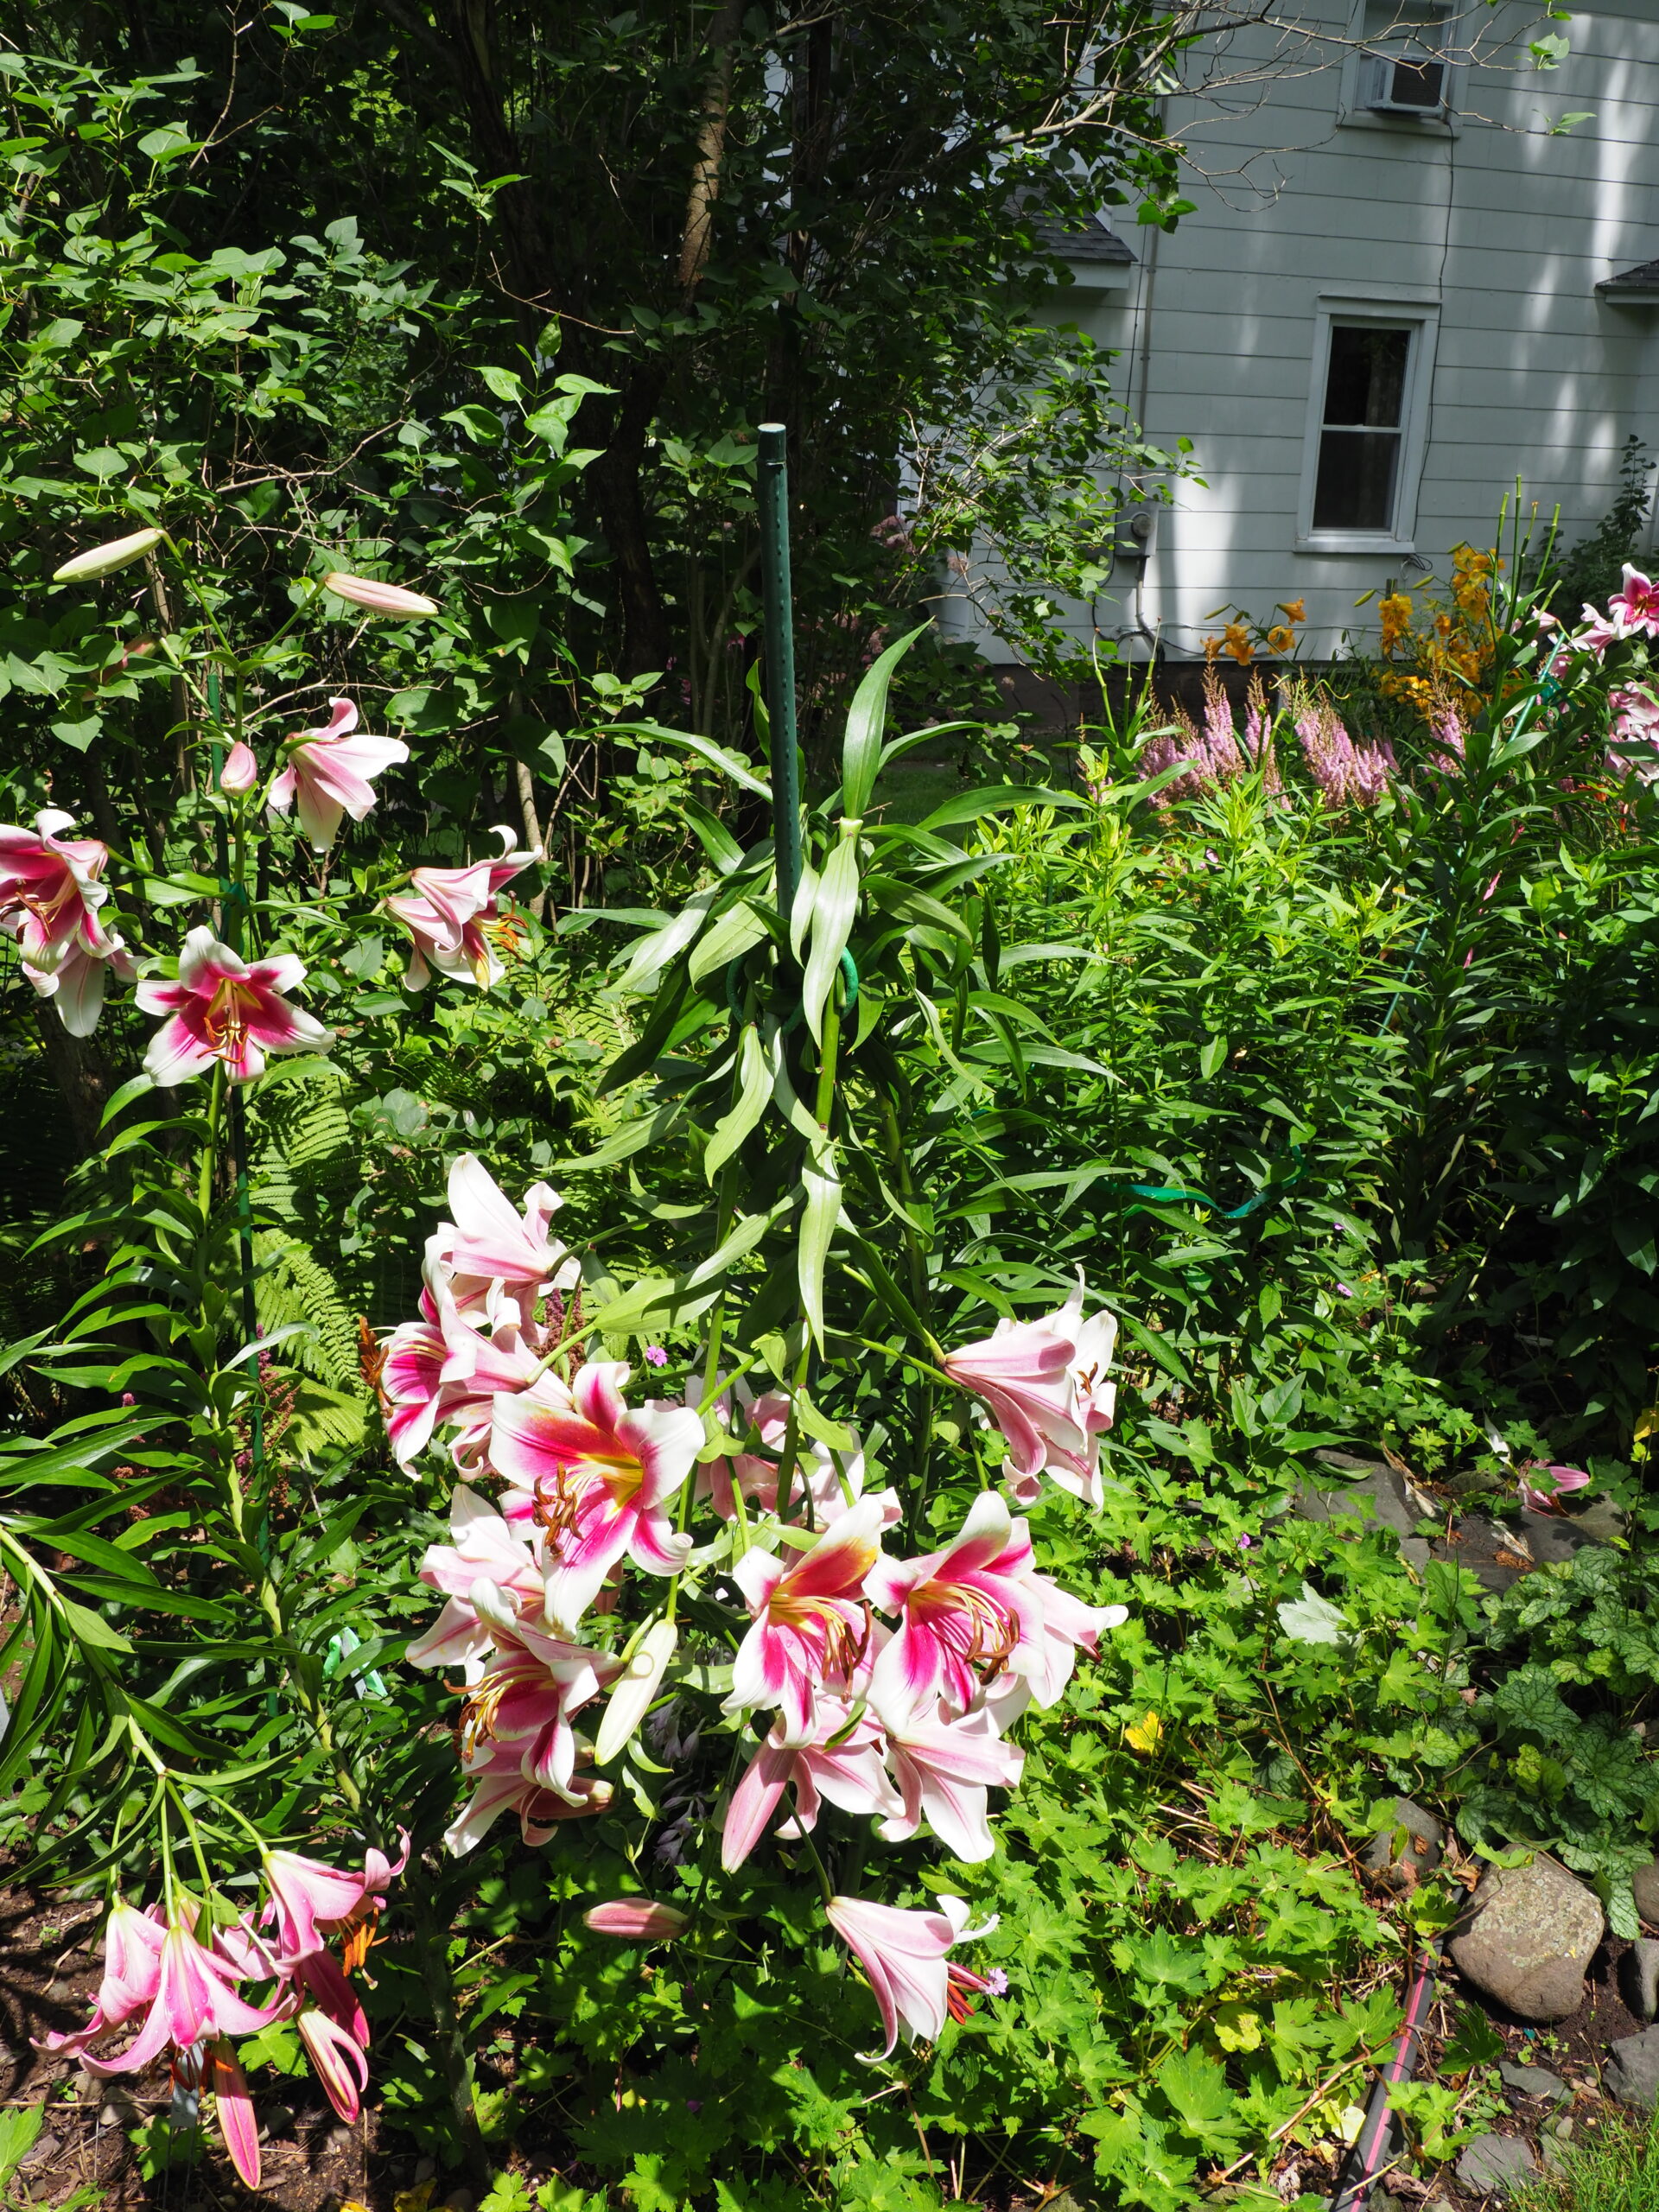 A heavier-duty 6-foot stake used to support this fallen lily was strong enough, but it should have been an 8-foot stake with two ties instead of the single tie visible about 18 inches below the top of the stake. Since the stem only bent and didn’t break, the flowers remained in tact and in bloom. ANDREW MESSINGER